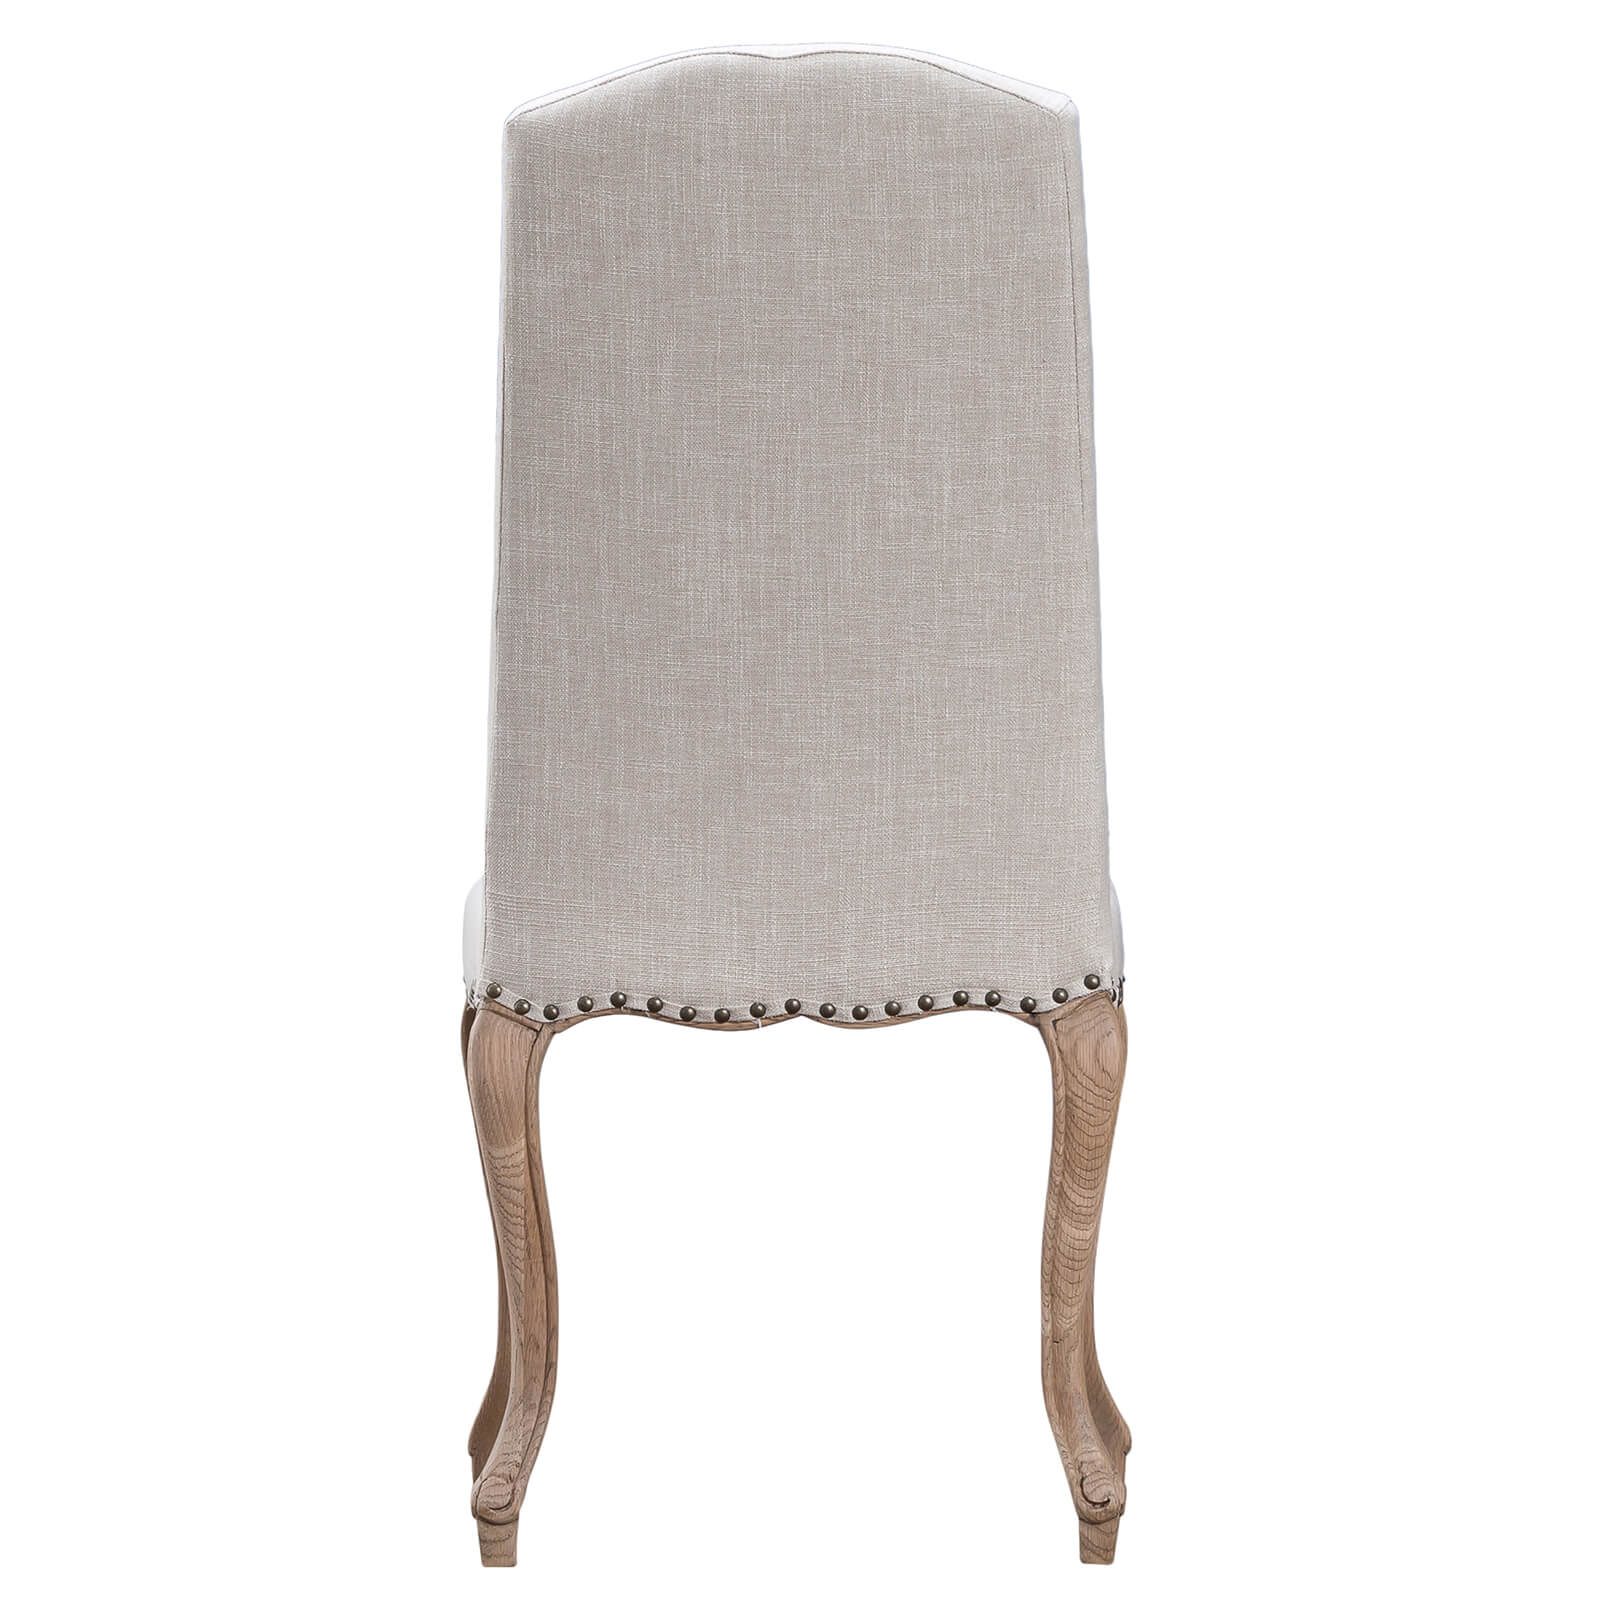 Studded Dining Chair - Set of 2 - Beige